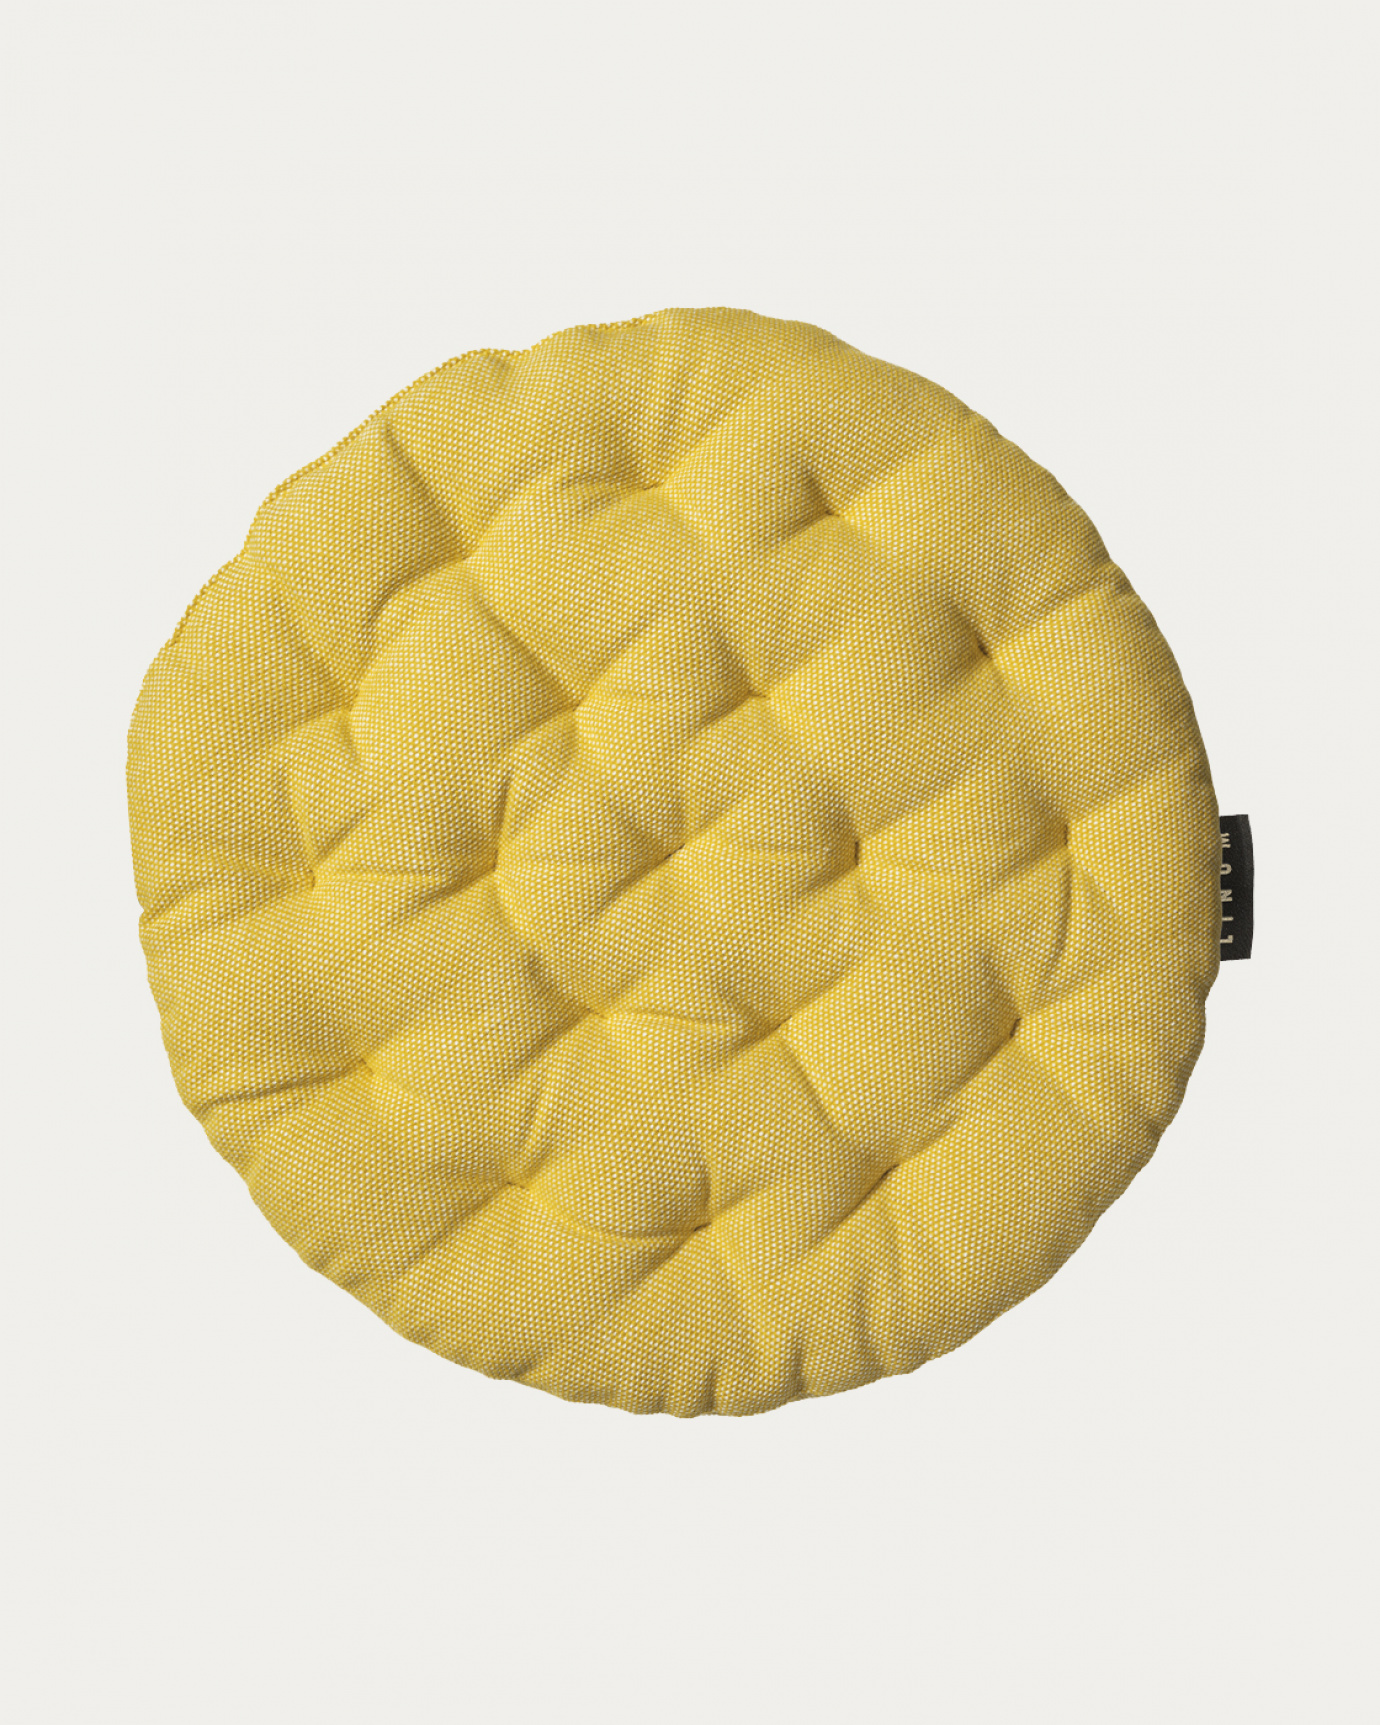 Product image mustard yellow PEPPER seat cushion made of soft cotton with recycled polyester filling from LINUM DESIGN. Size ø37 cm.